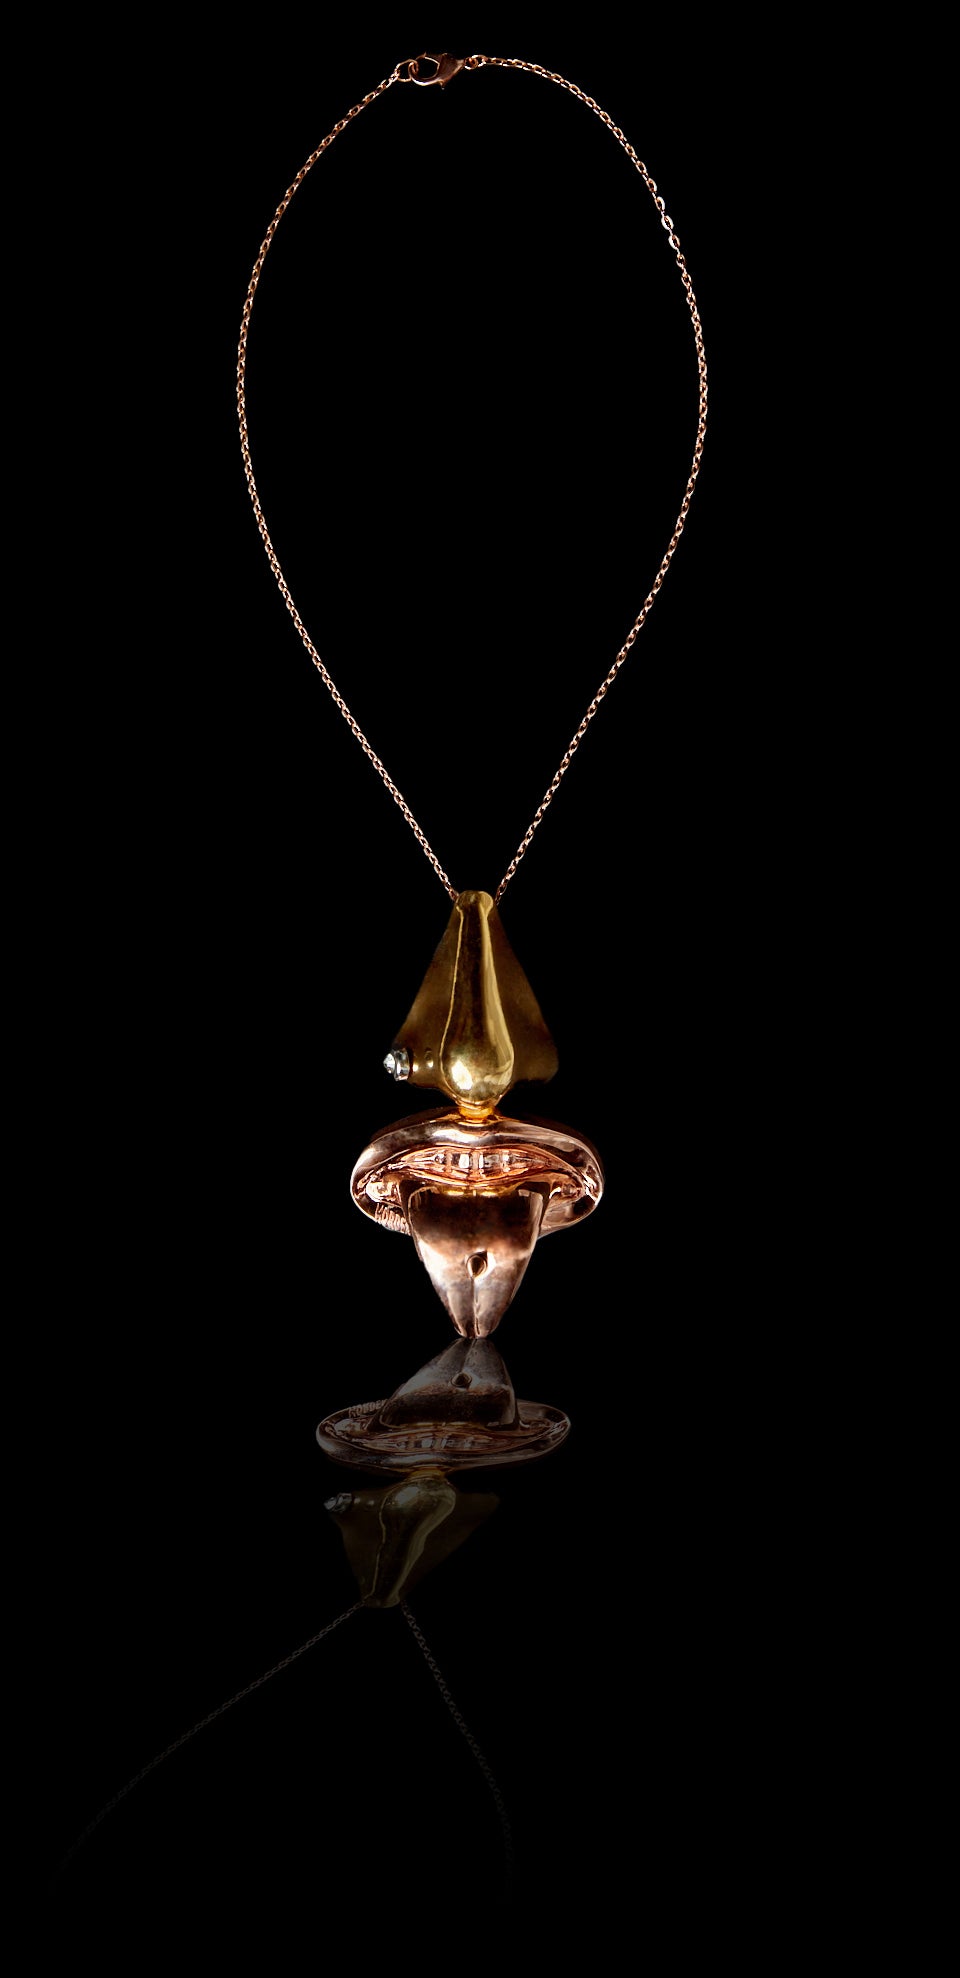 Inspired by the Dali perfume bottle, this pendant is the most unique conversation and statement neckpiece you will ever own. Constructed of our creative director’s face, it is a nose adorned with a crystal stud, and a tongue adorned with spike.